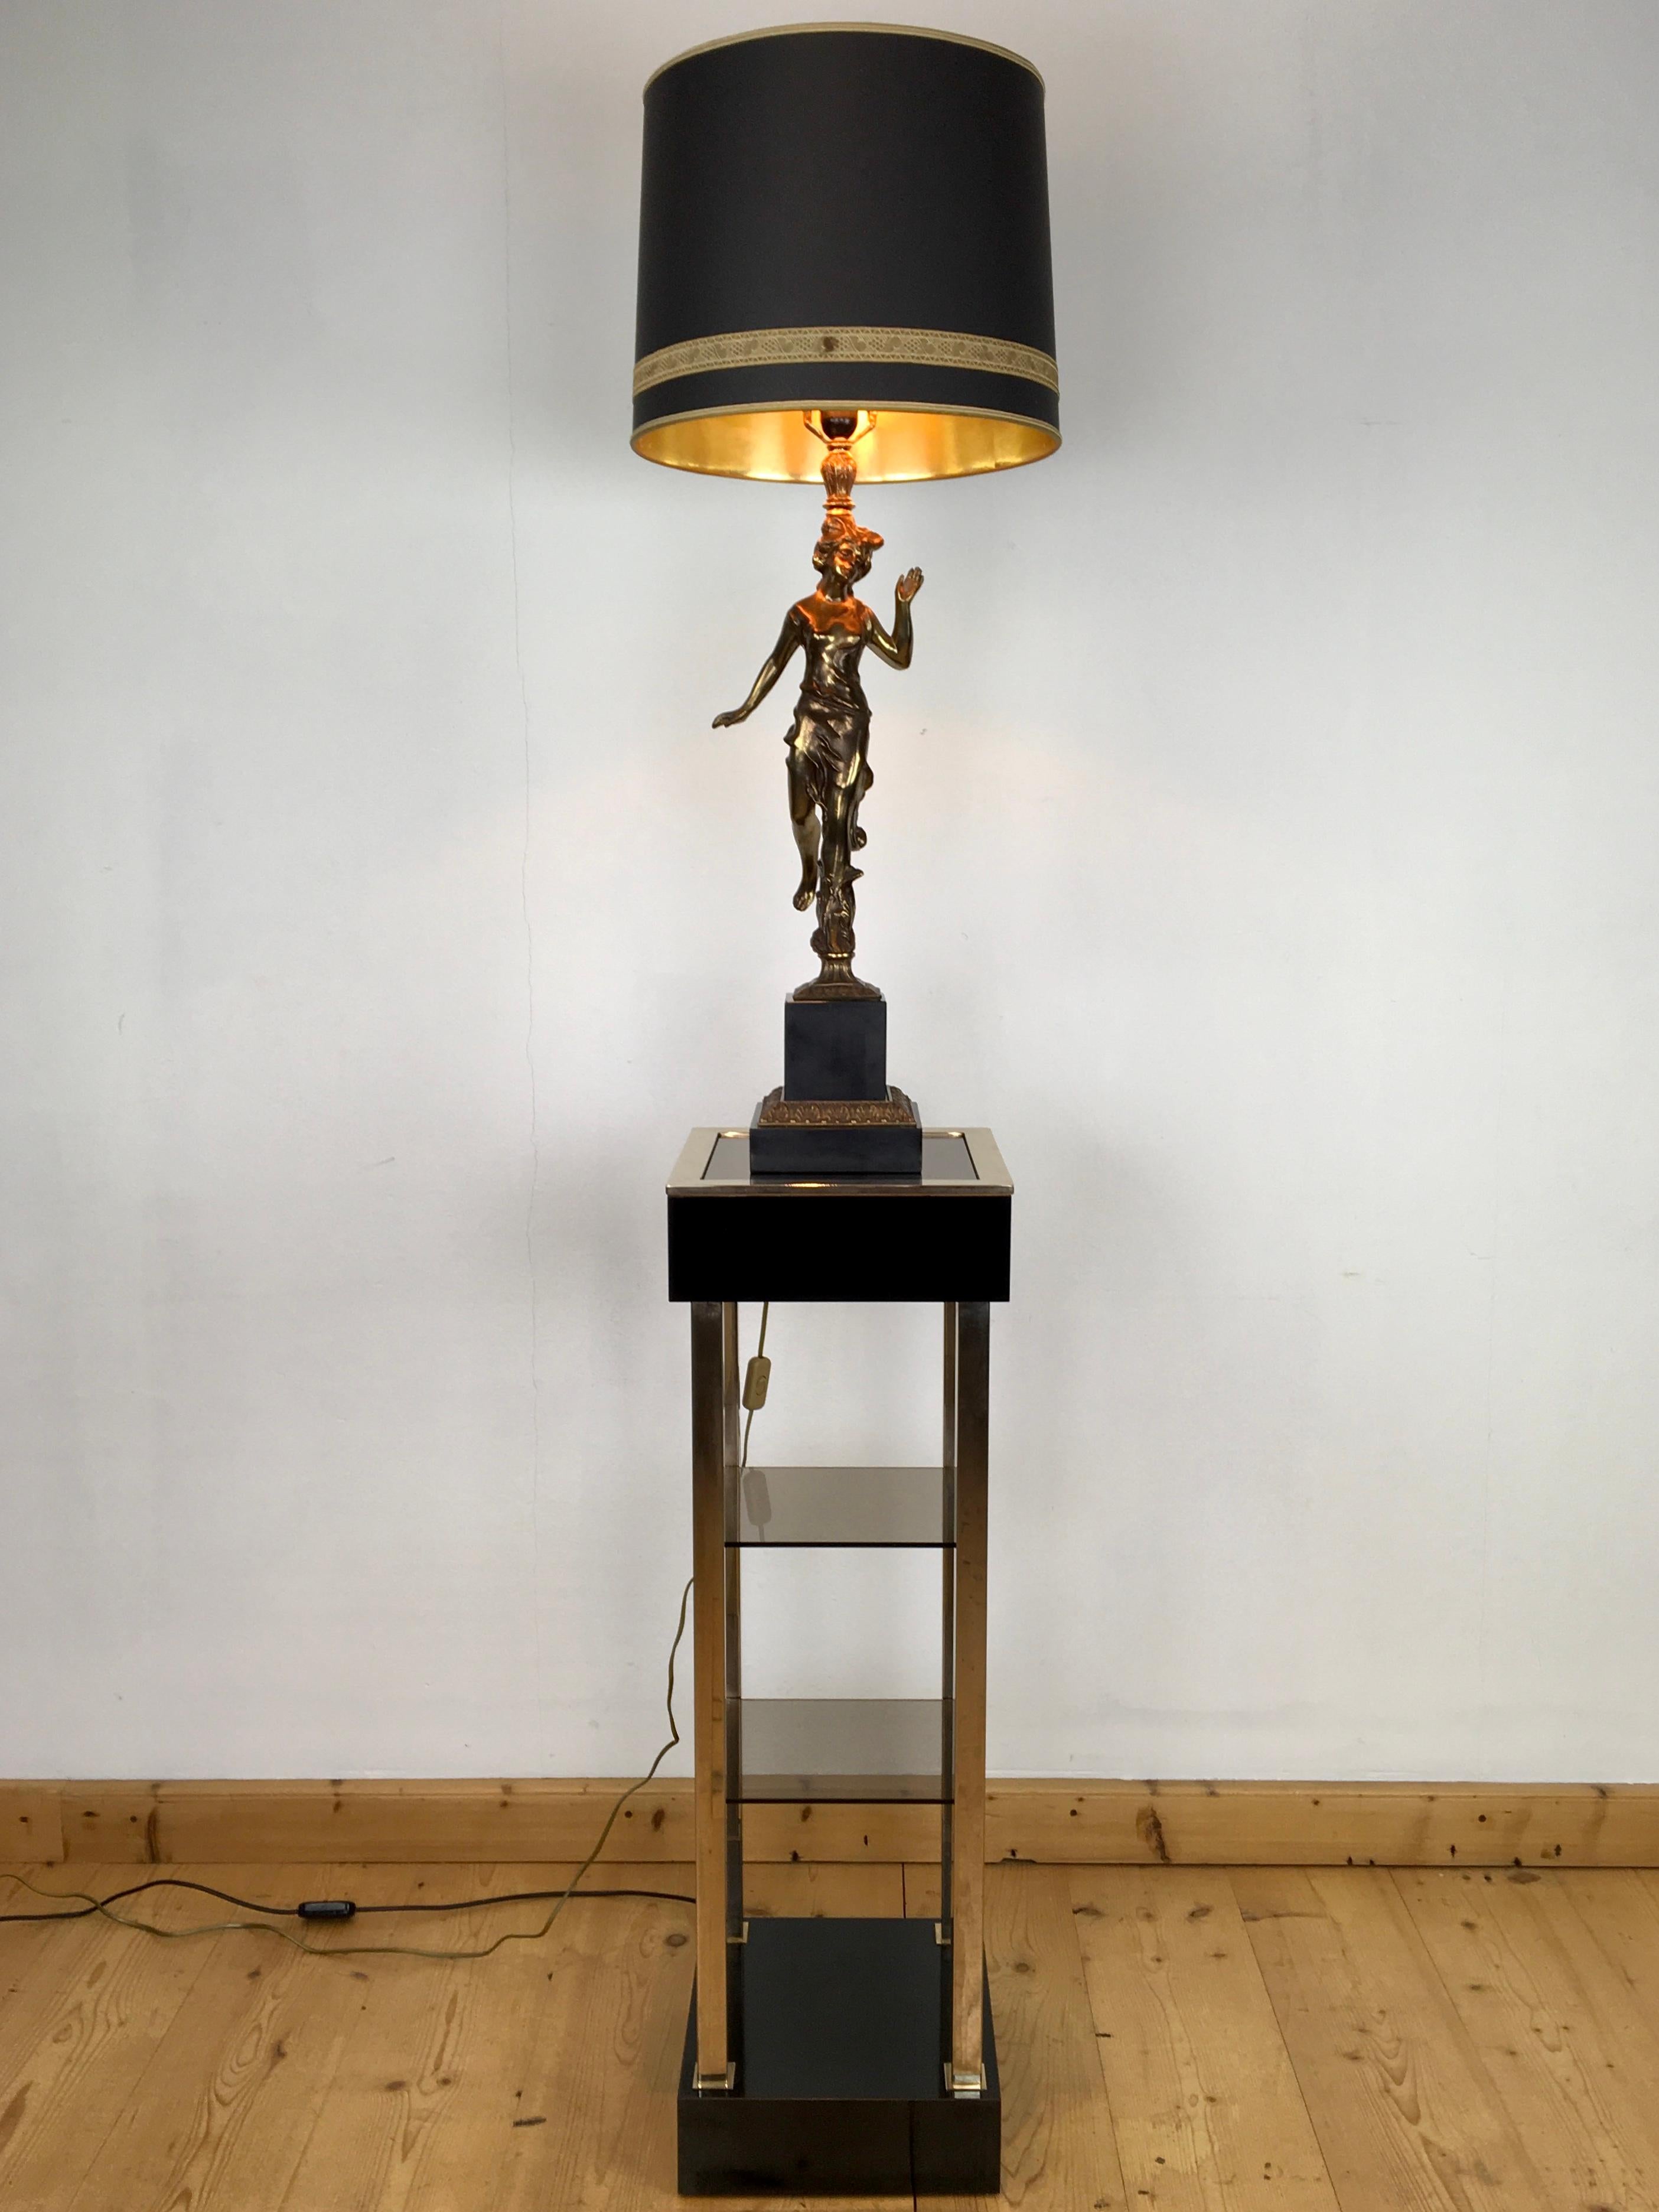 Spectacular large figural table lamp with an elegant lady.
A Hollywood Regency table lamp with an Art Nouveau touch made by Deknudt Belgium.
A graceful lady or women in draped dress standing on one foot on a Belgian black marble base which has